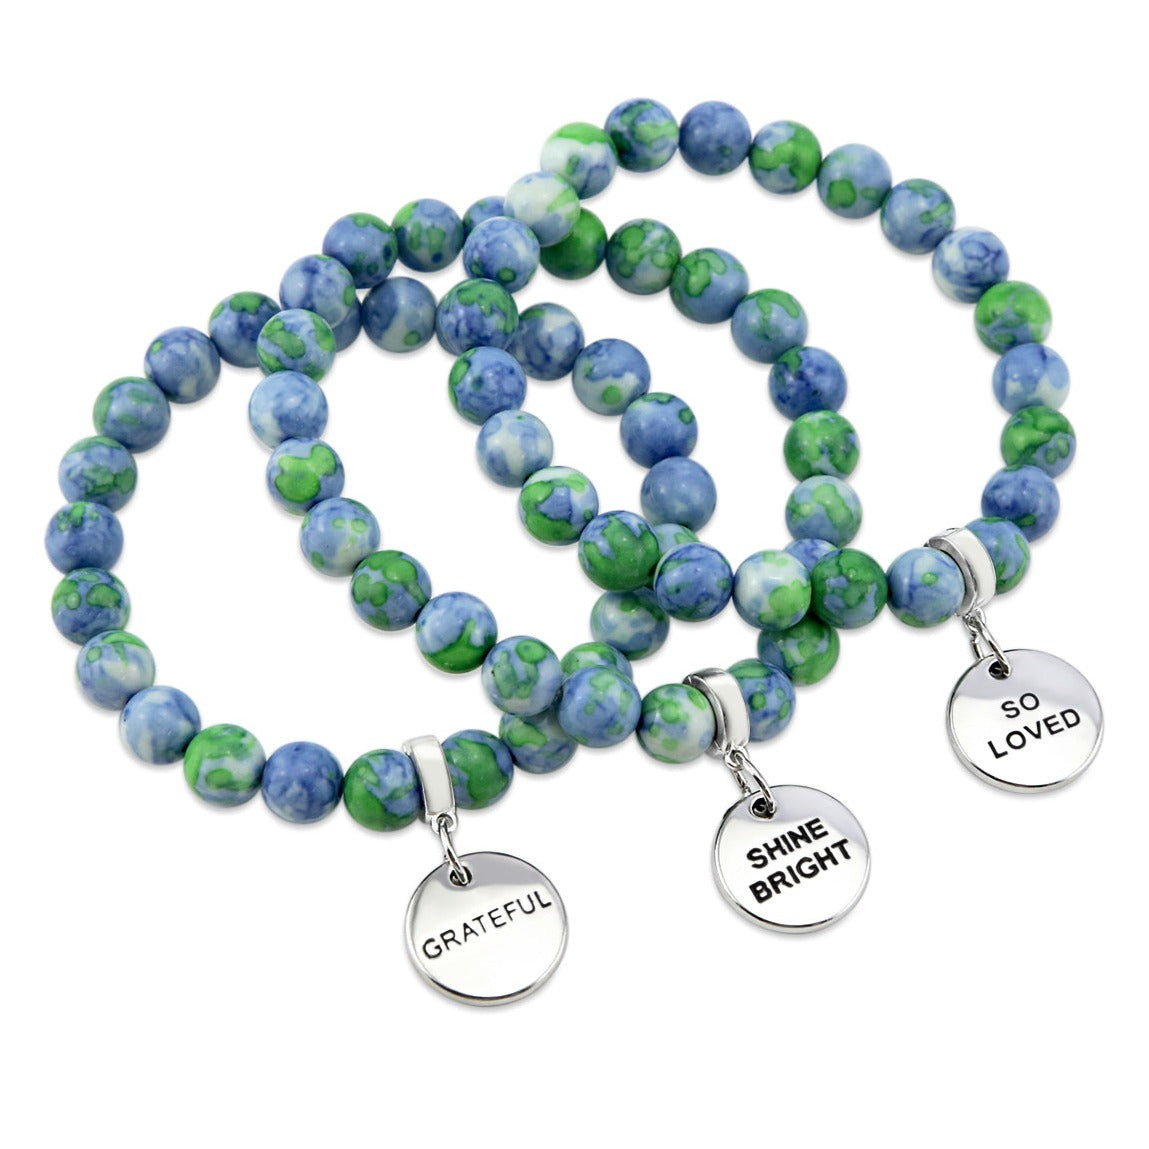 Stone Bracelet - Blue & Lime Patch Agate Stone 8mm Beads - With Silver Word charm